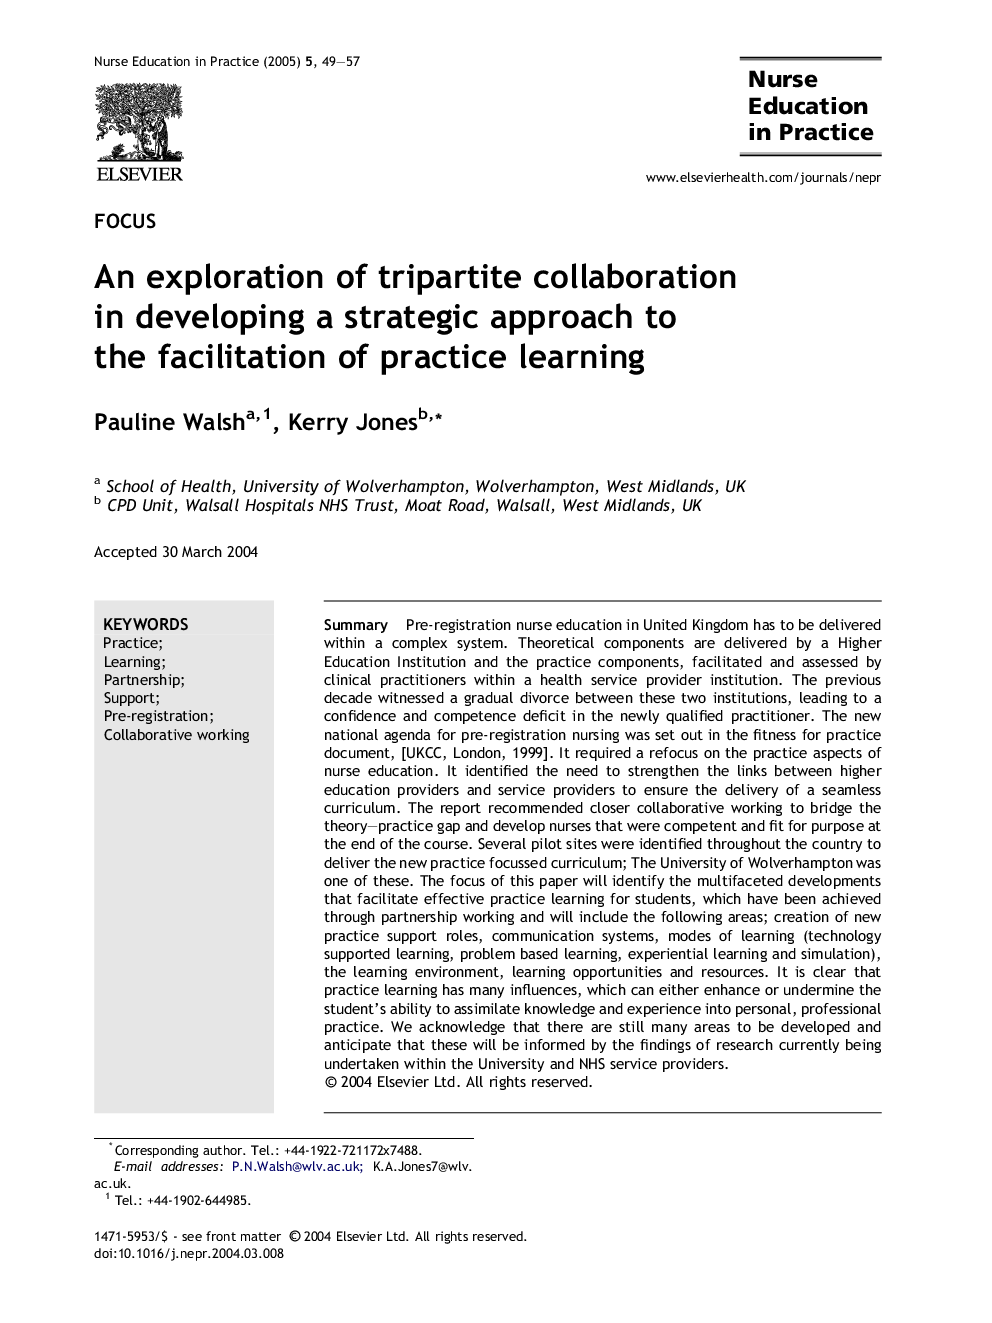 An exploration of tripartite collaboration in developing a strategic approach to the facilitation of practice learning